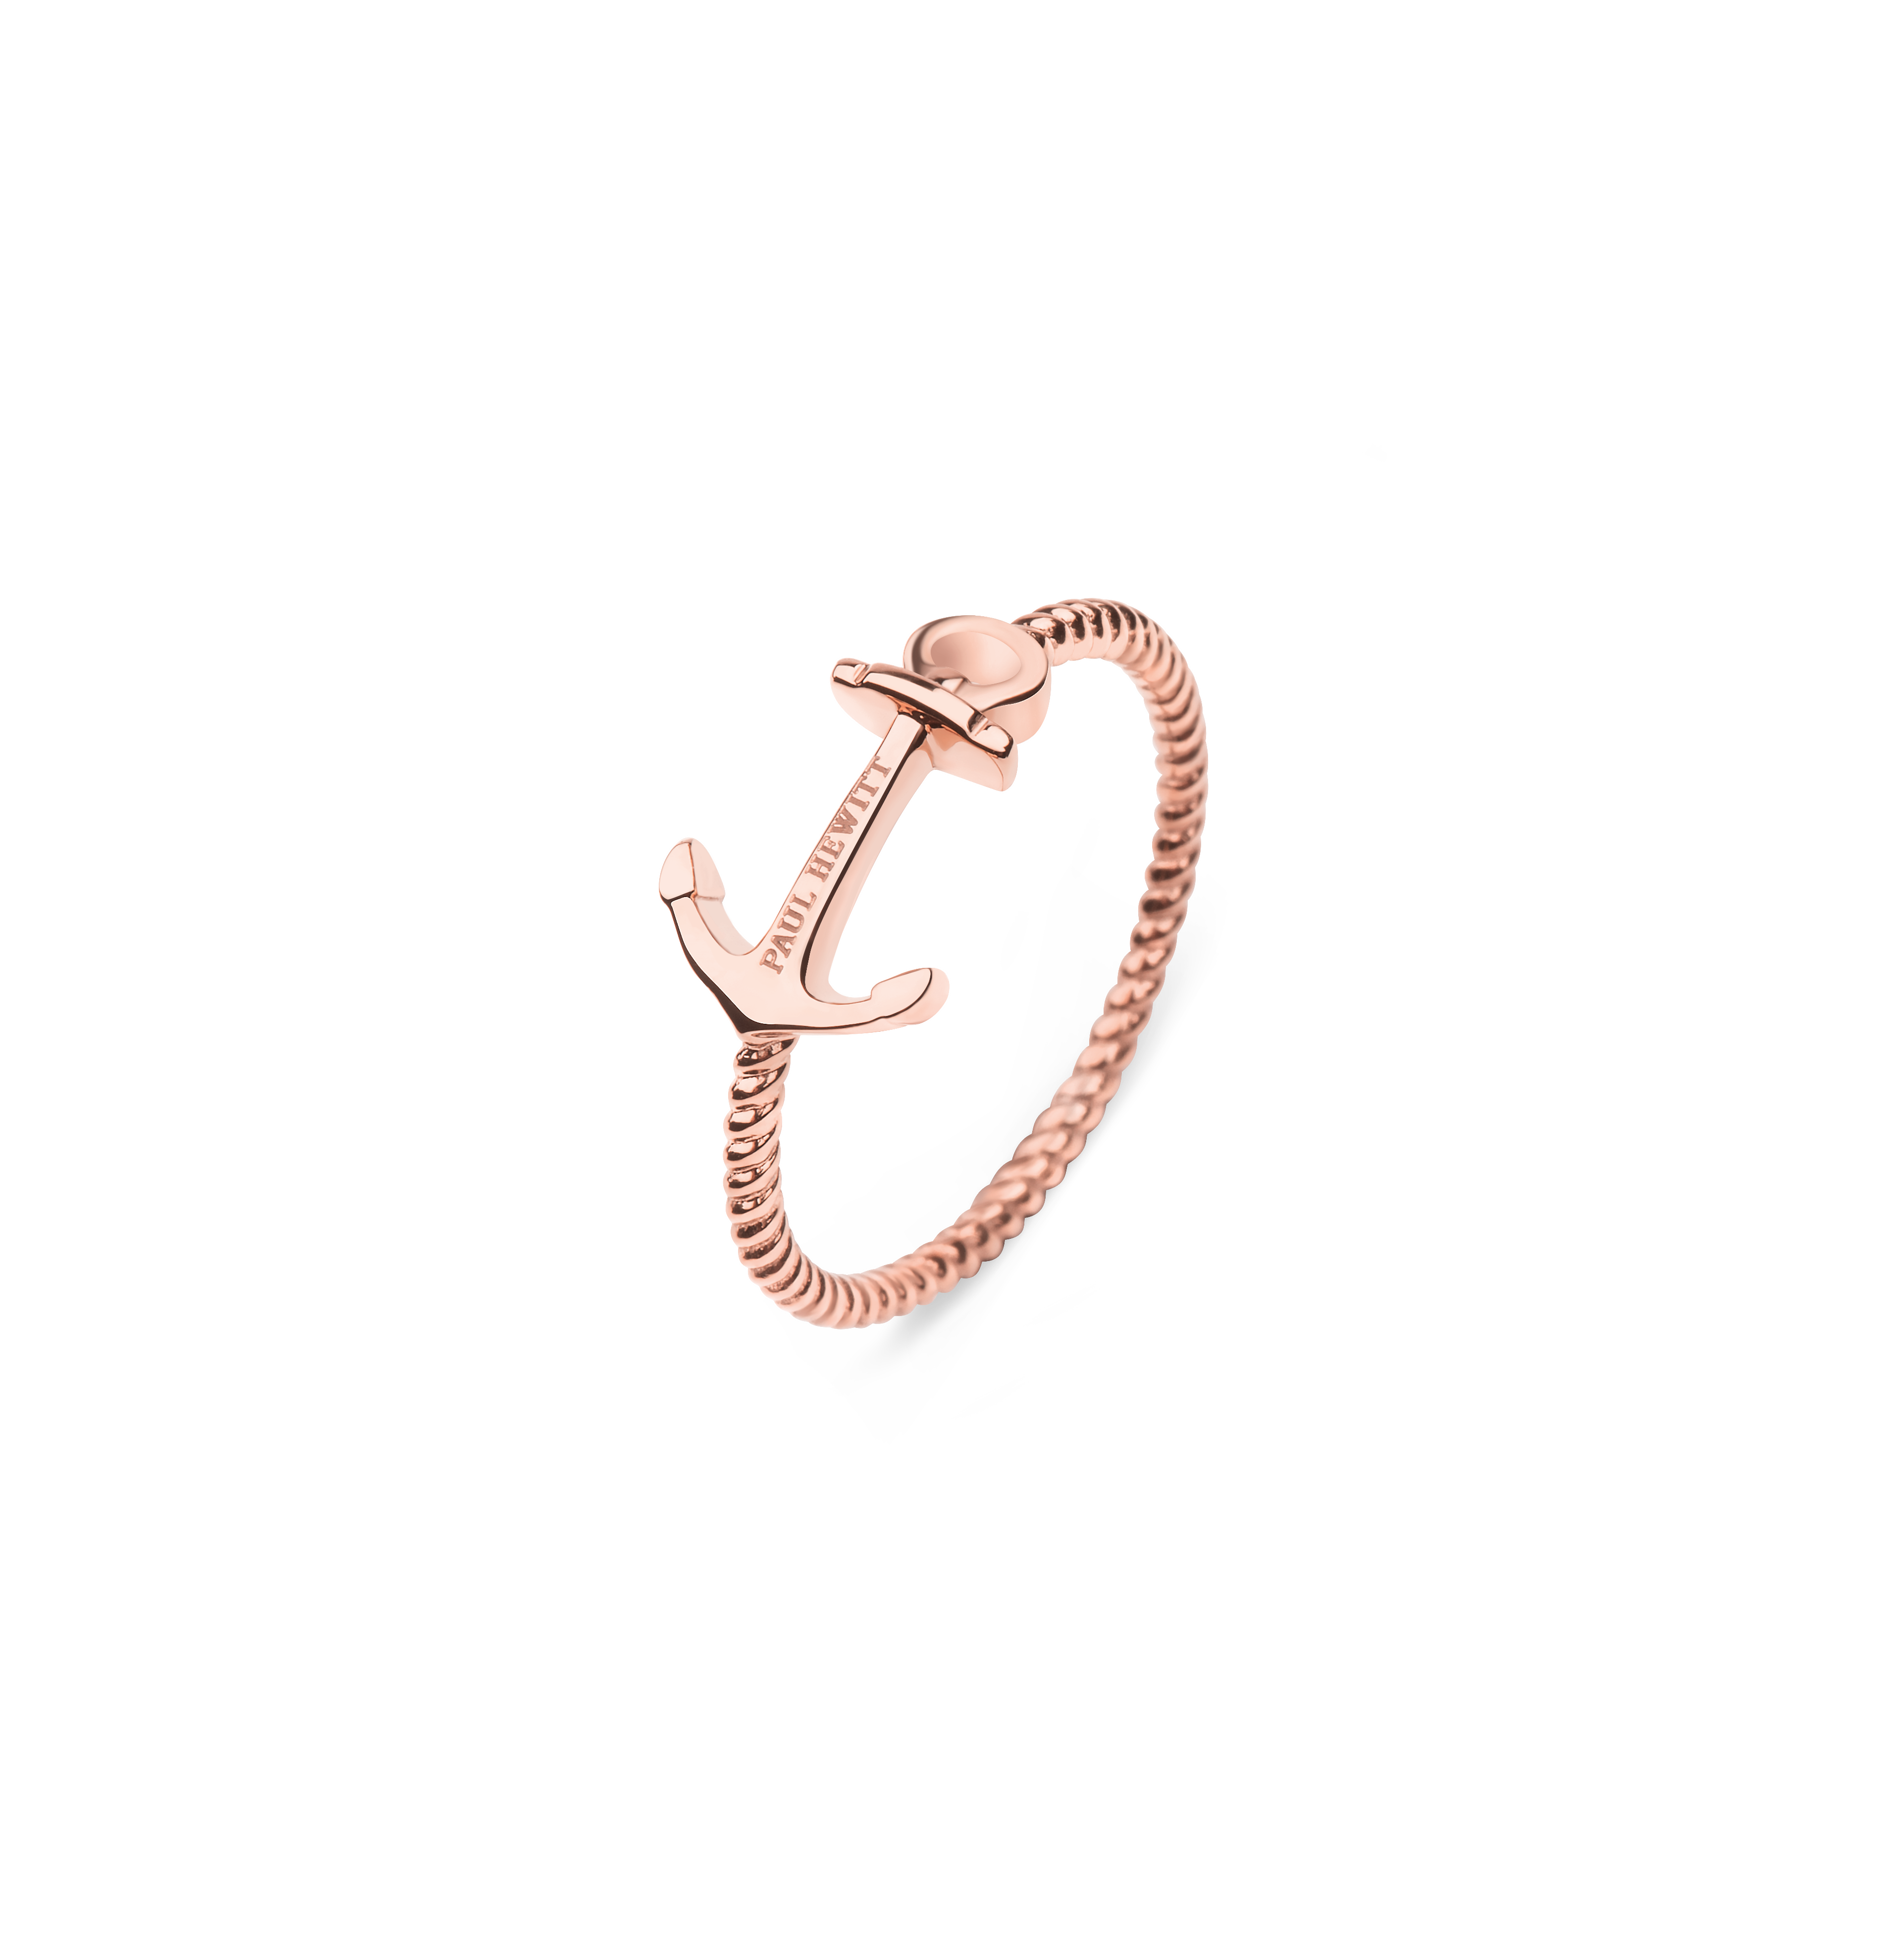 Anchor Rope Ring Rose Gold